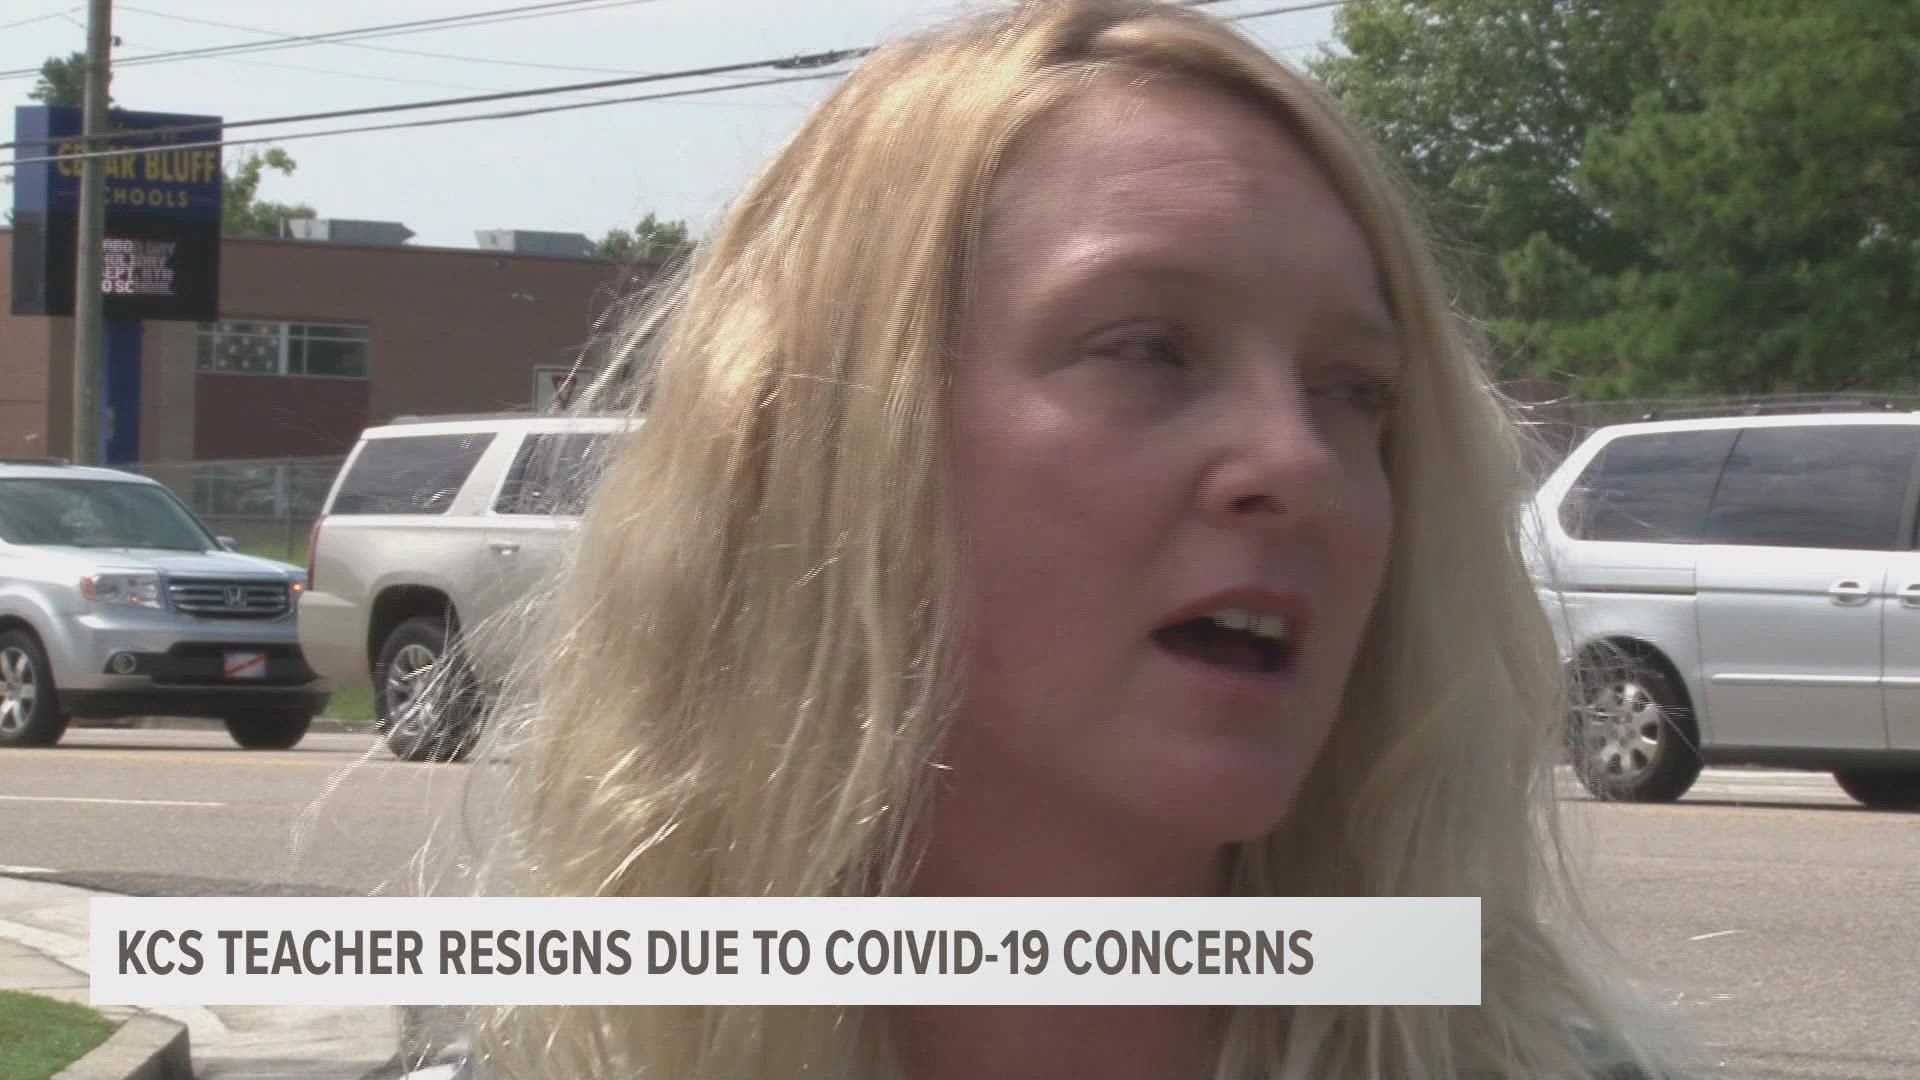 The teacher suffers from a weakened immune system and says she blames Knox County Schools leaders for failing to do more to stop the spread of the virus.